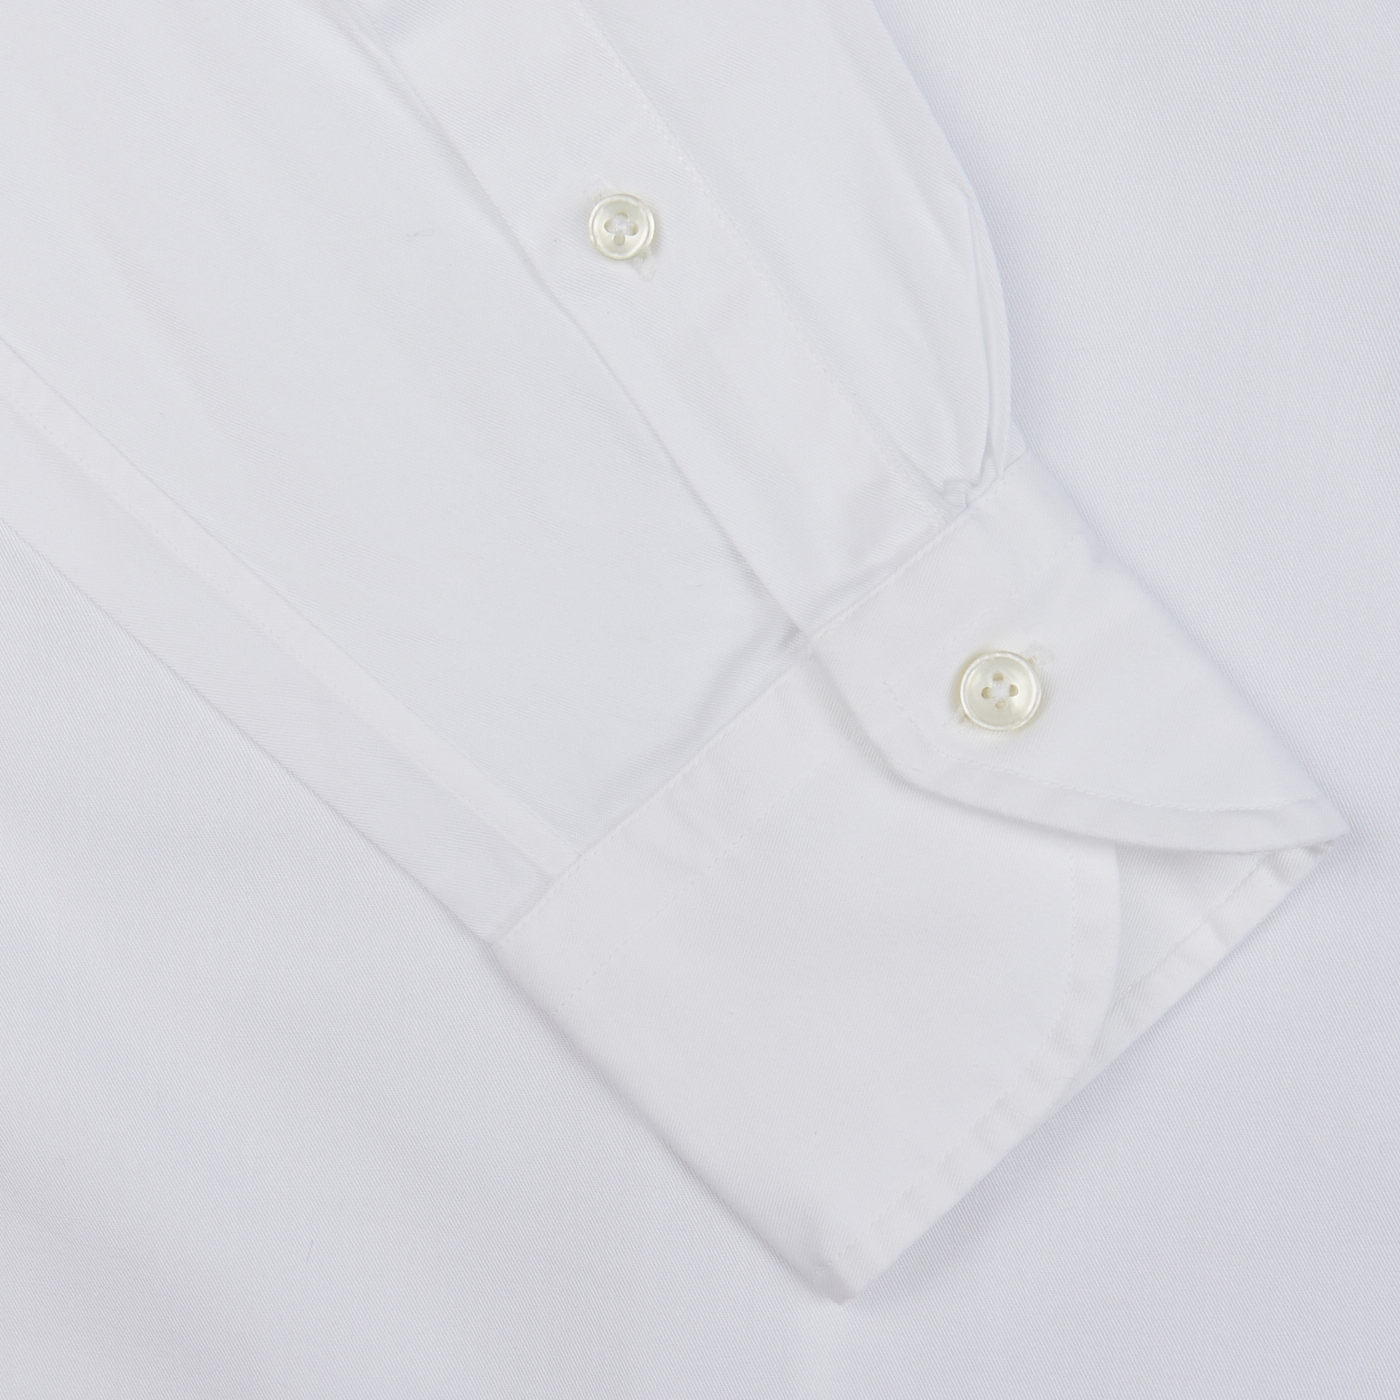 Close-up of a Xacus White Cotton Twill Tailor Fit Shirt cuff with buttons on a white background.